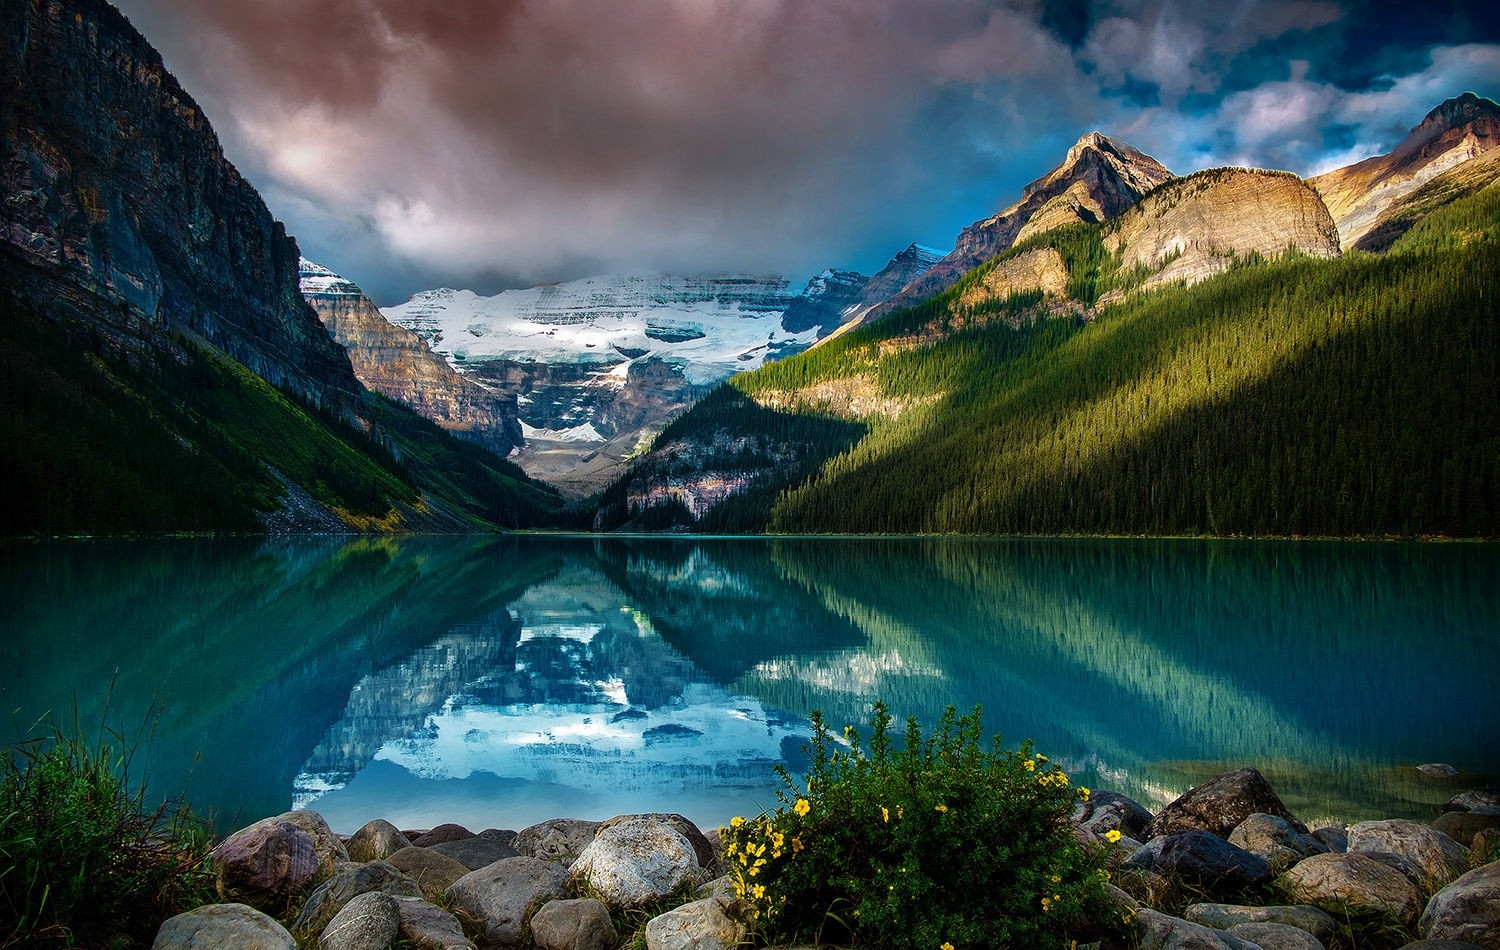 photography, Nature, Landscape, Lake, Mountains, Forest, Reflection, Calm waters, Snow, Clouds, Wildflowers, Lake Louise, Alberta, Canada Wallpaper